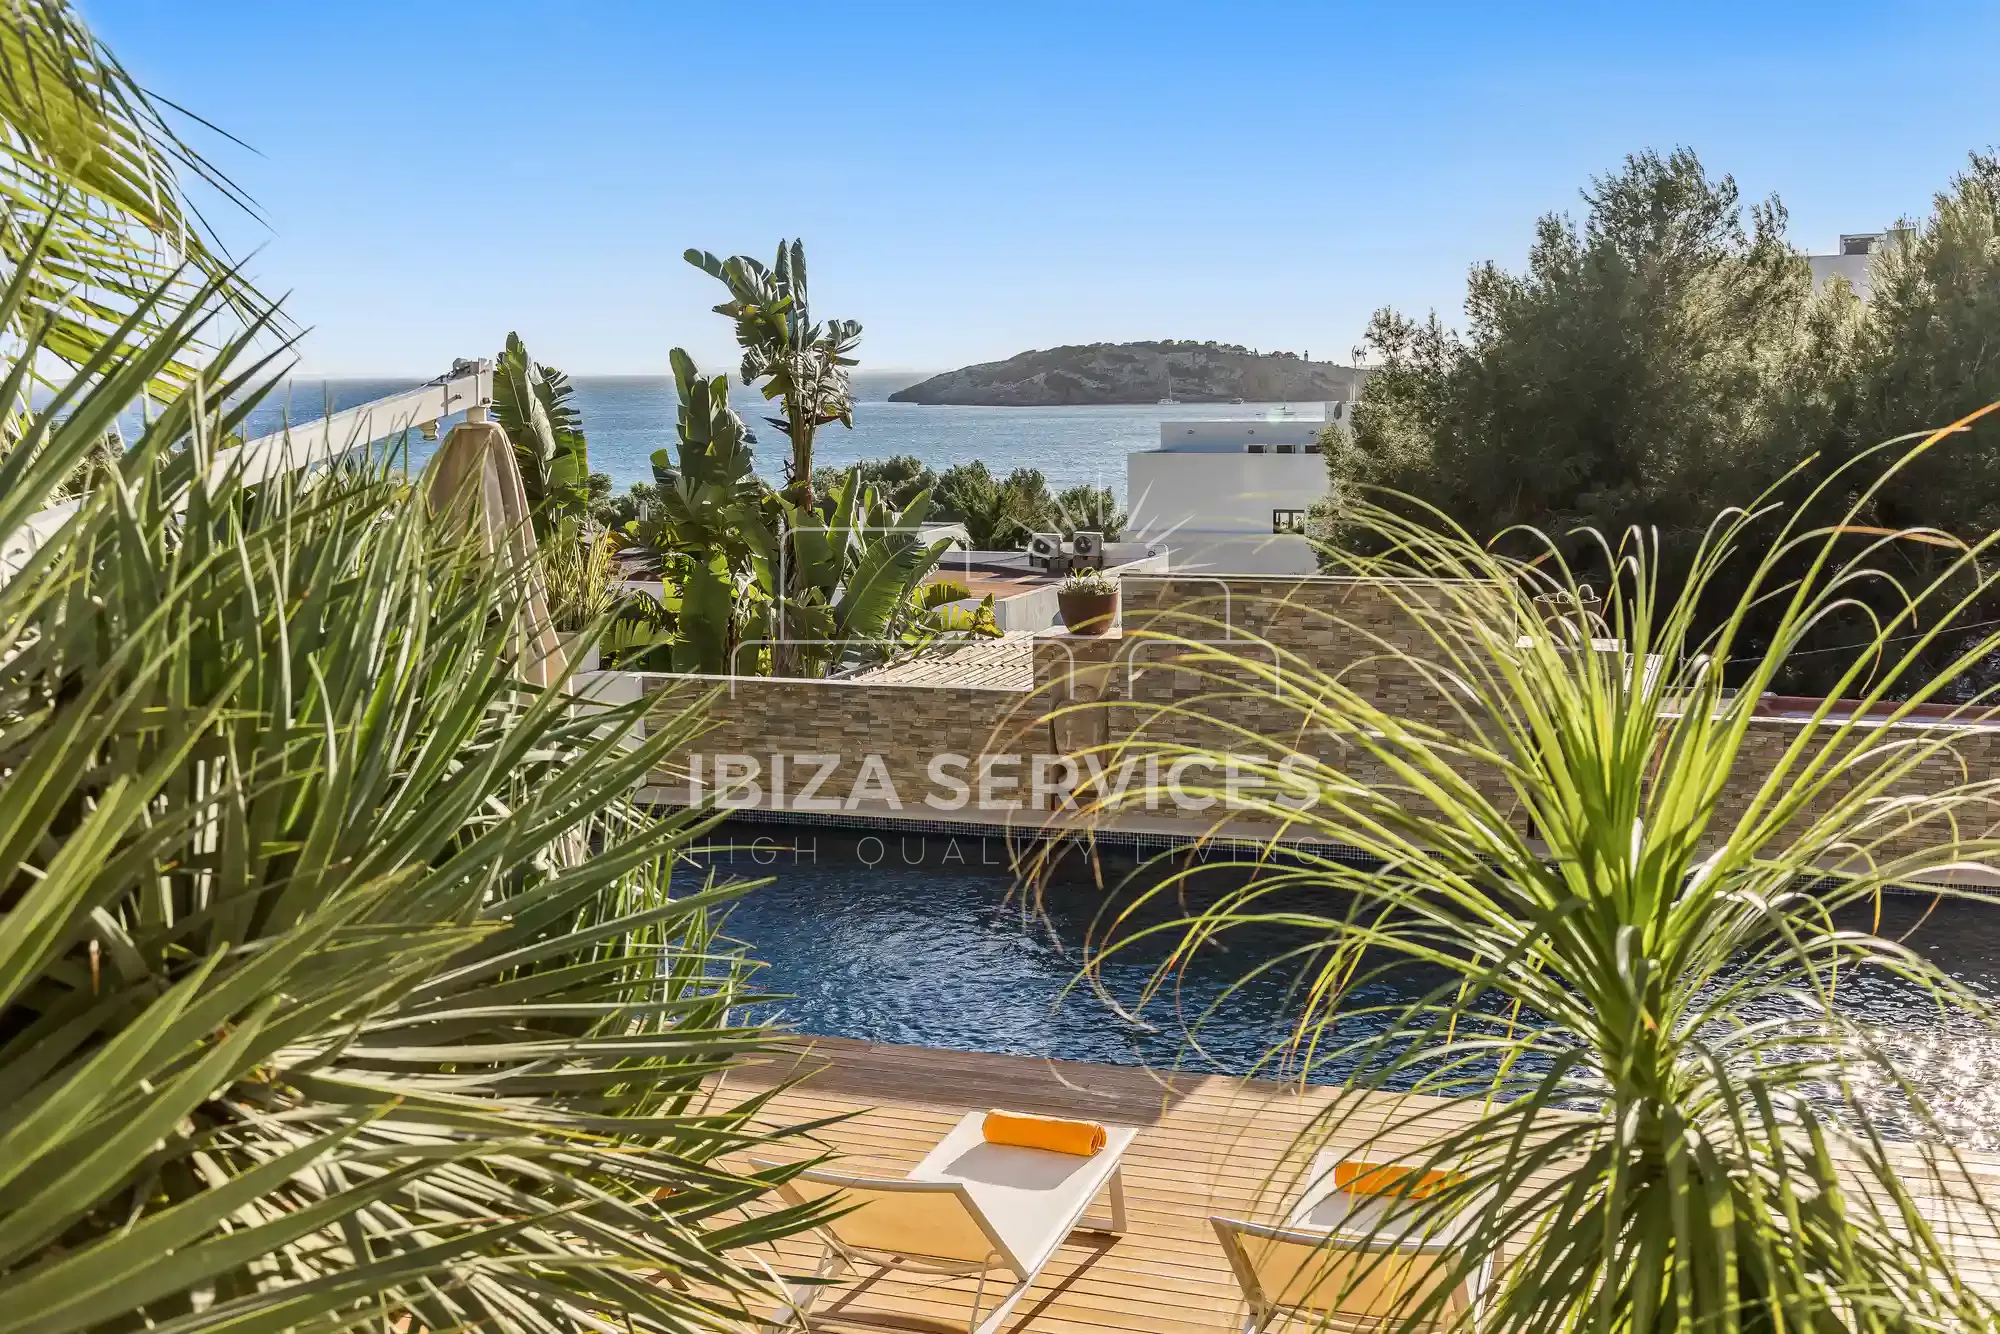 Exceptional Villa 5 bedrooms with stunning view in Cap Martinet.